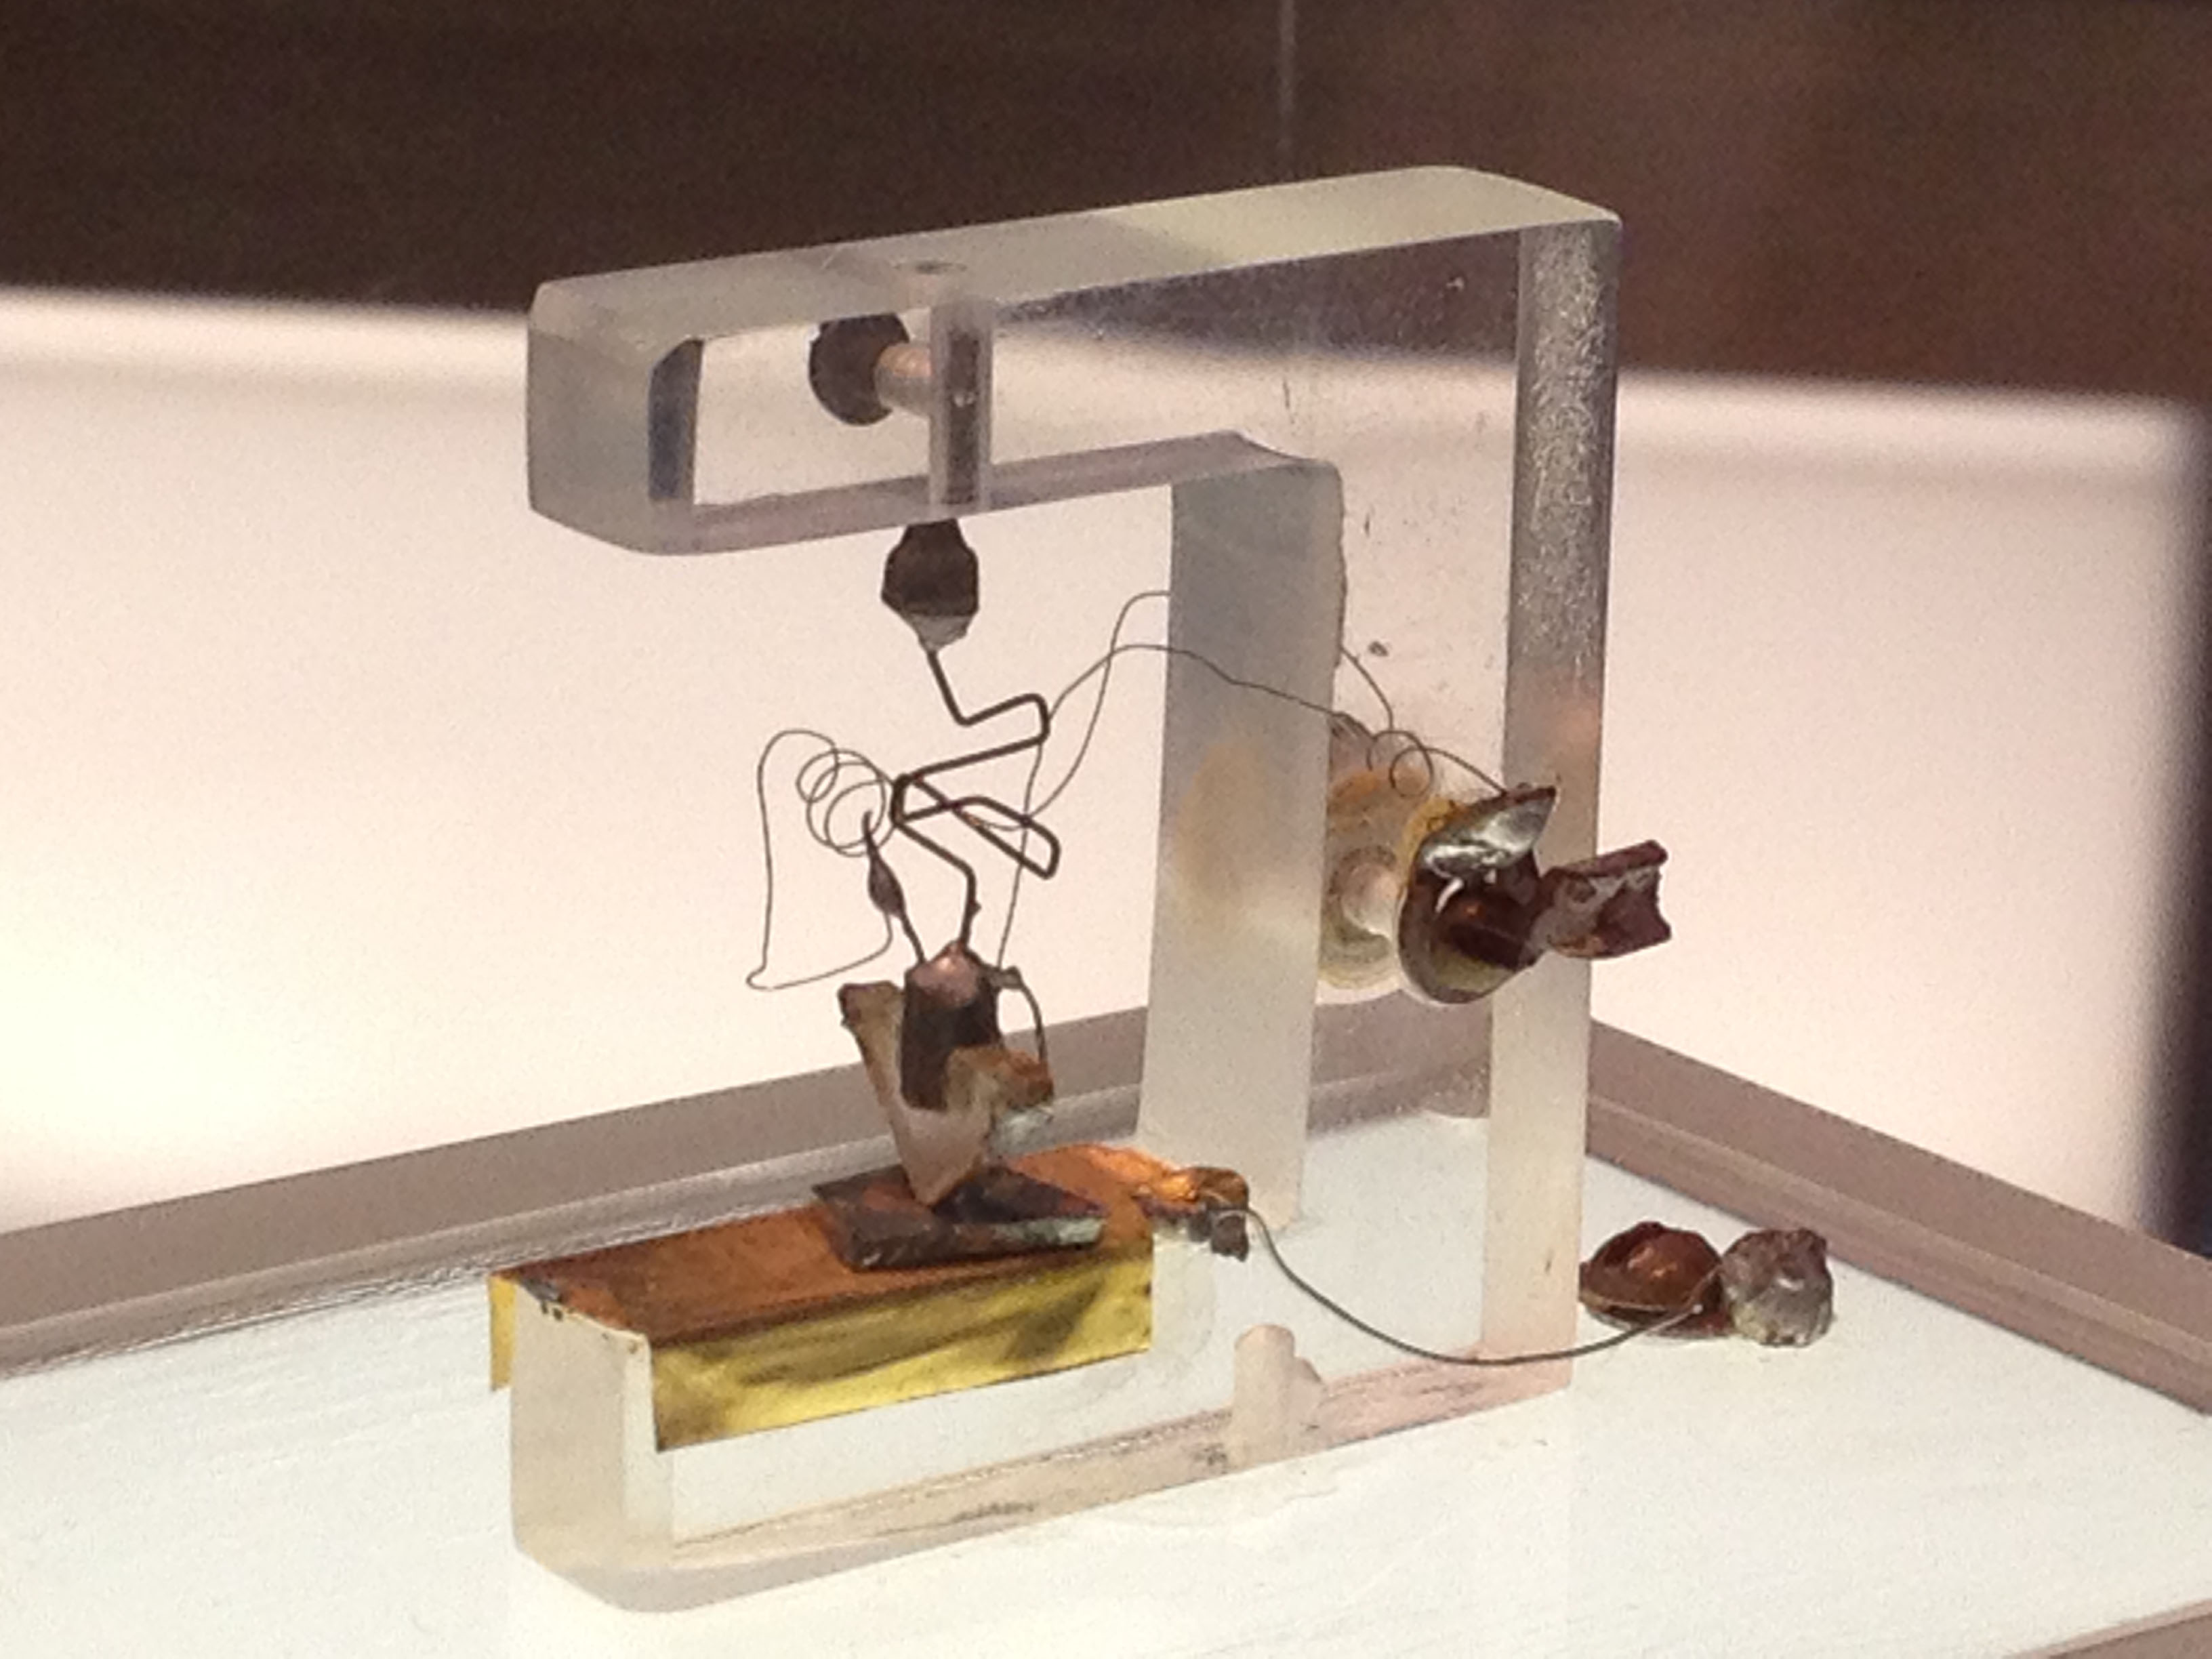 The world's first transistor built in December 1947.